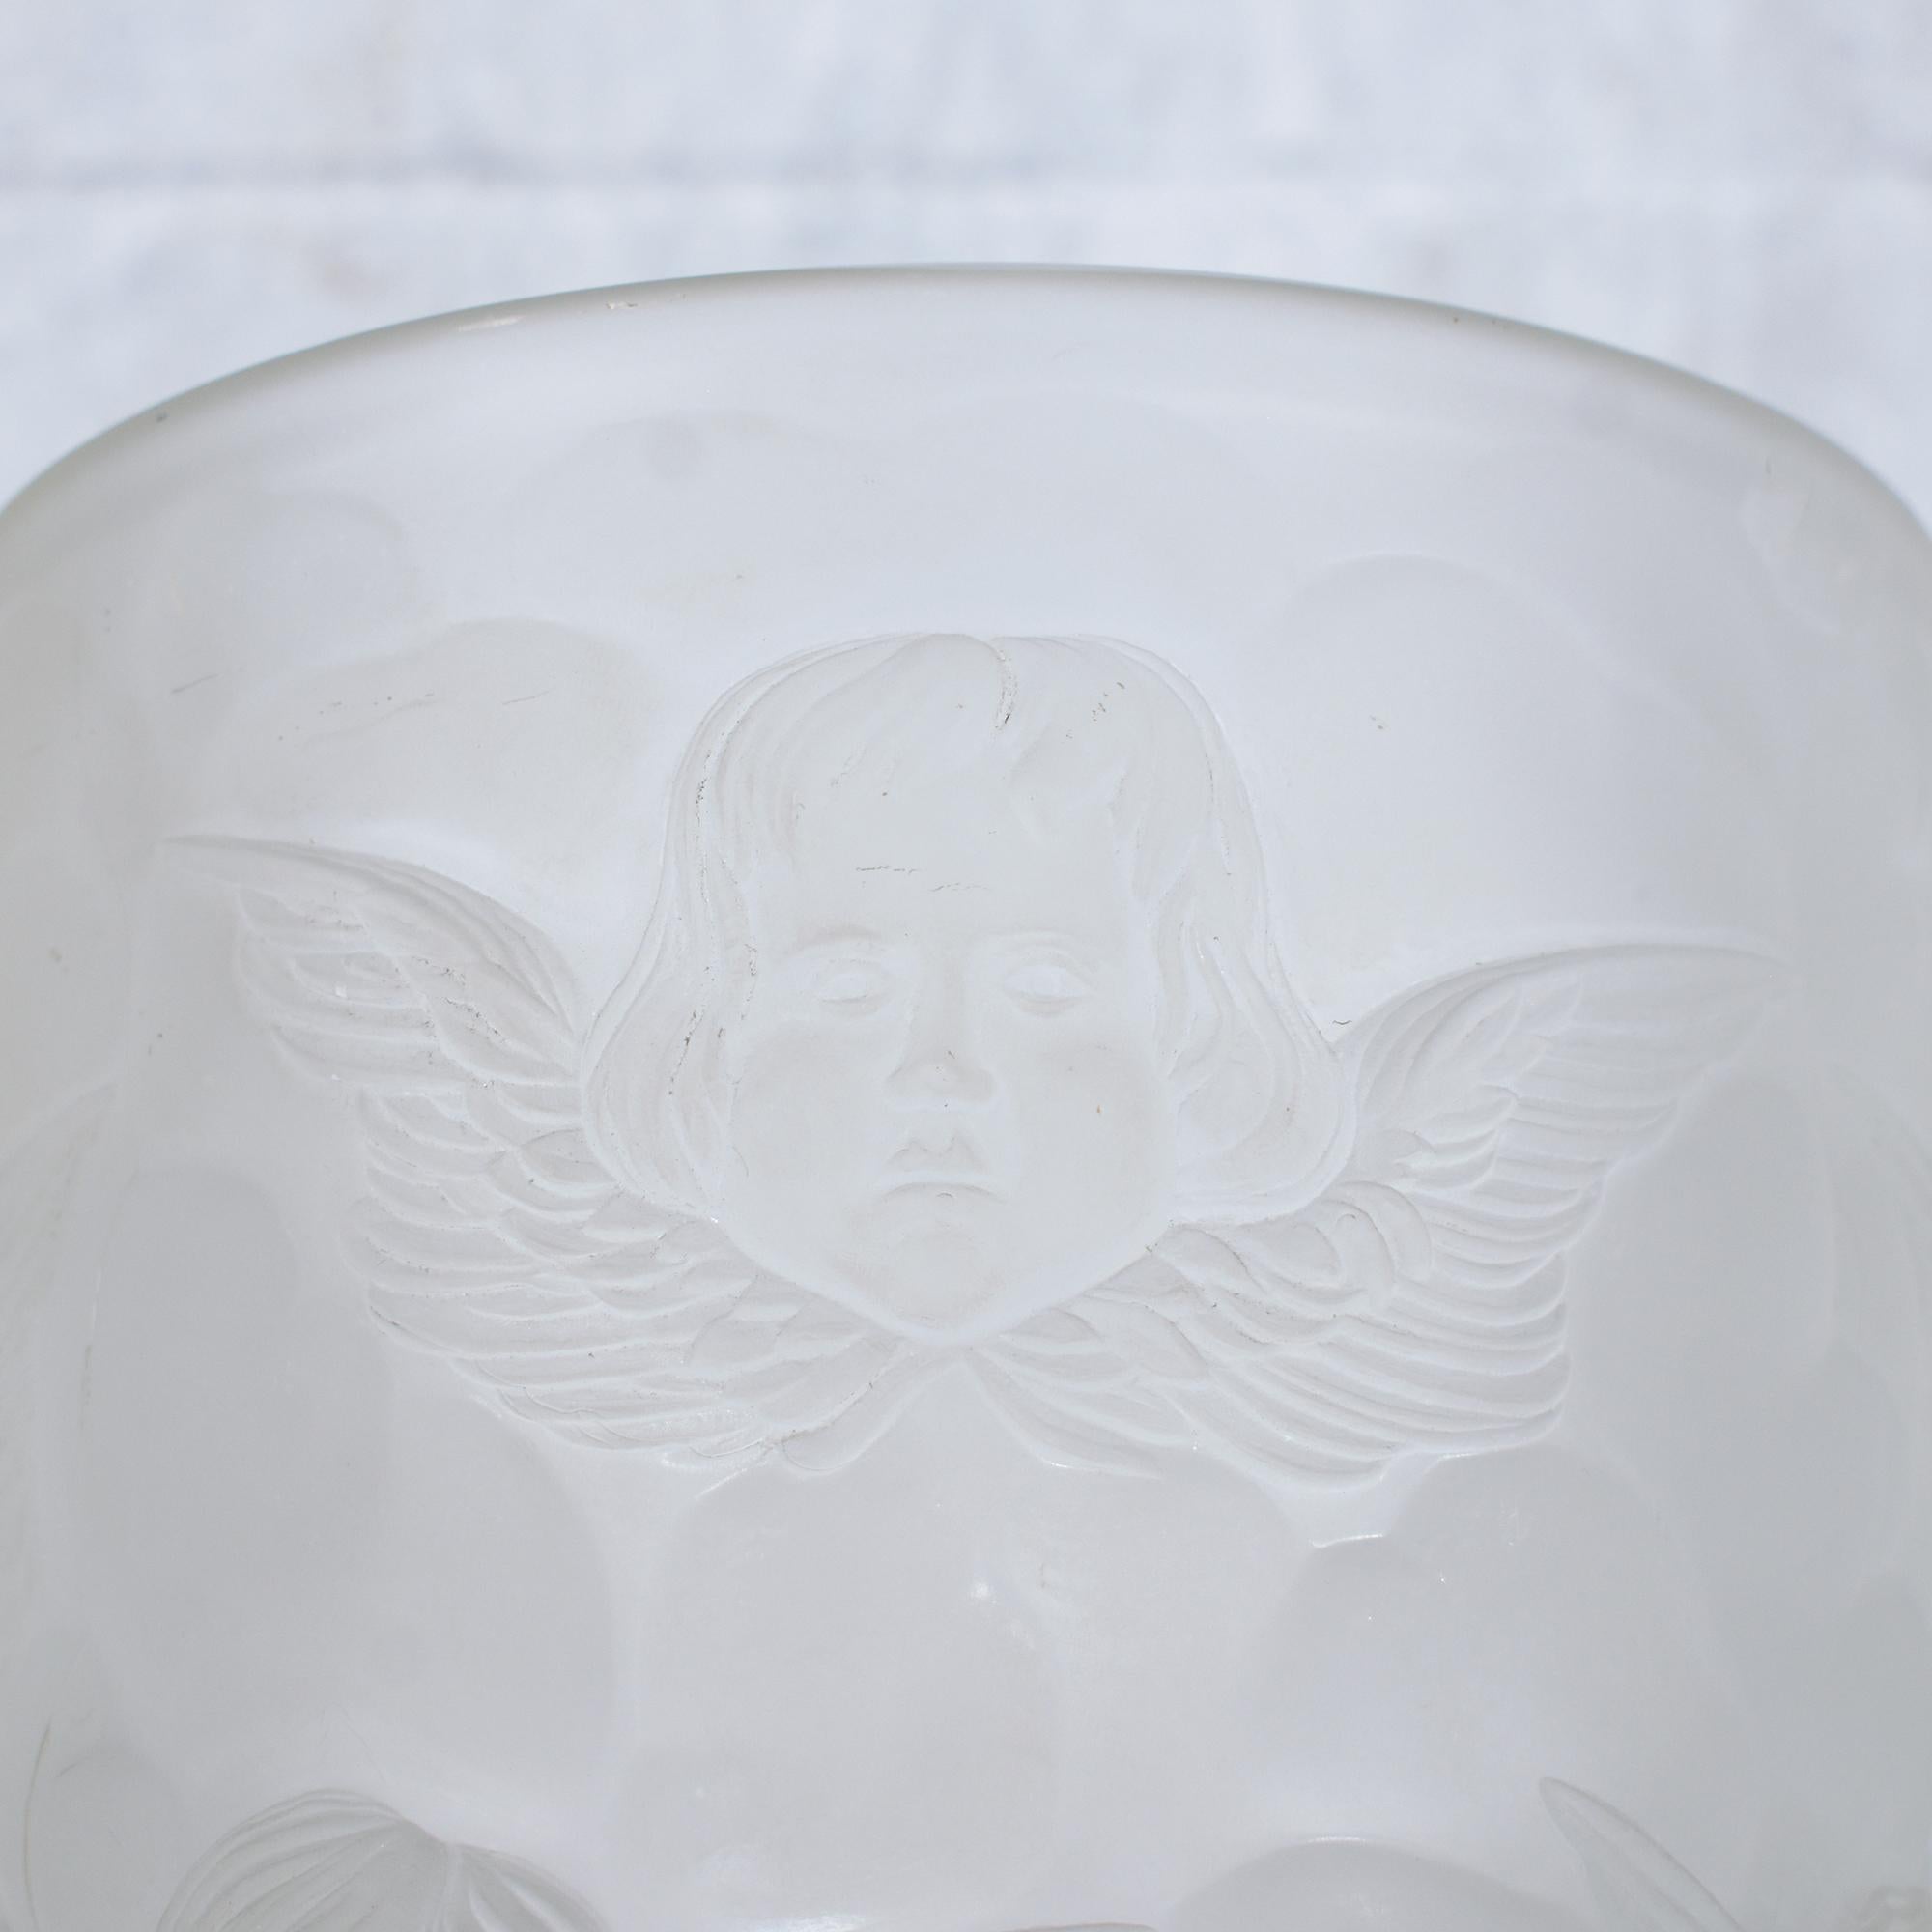 Embrace the captivating beauty of our Glass Vase, a testament to skilled artisanship and graceful design. This vase, in good condition, is a marvel of glass craftsmanship, featuring a refined frosted finish that lends it both texture and elegance.